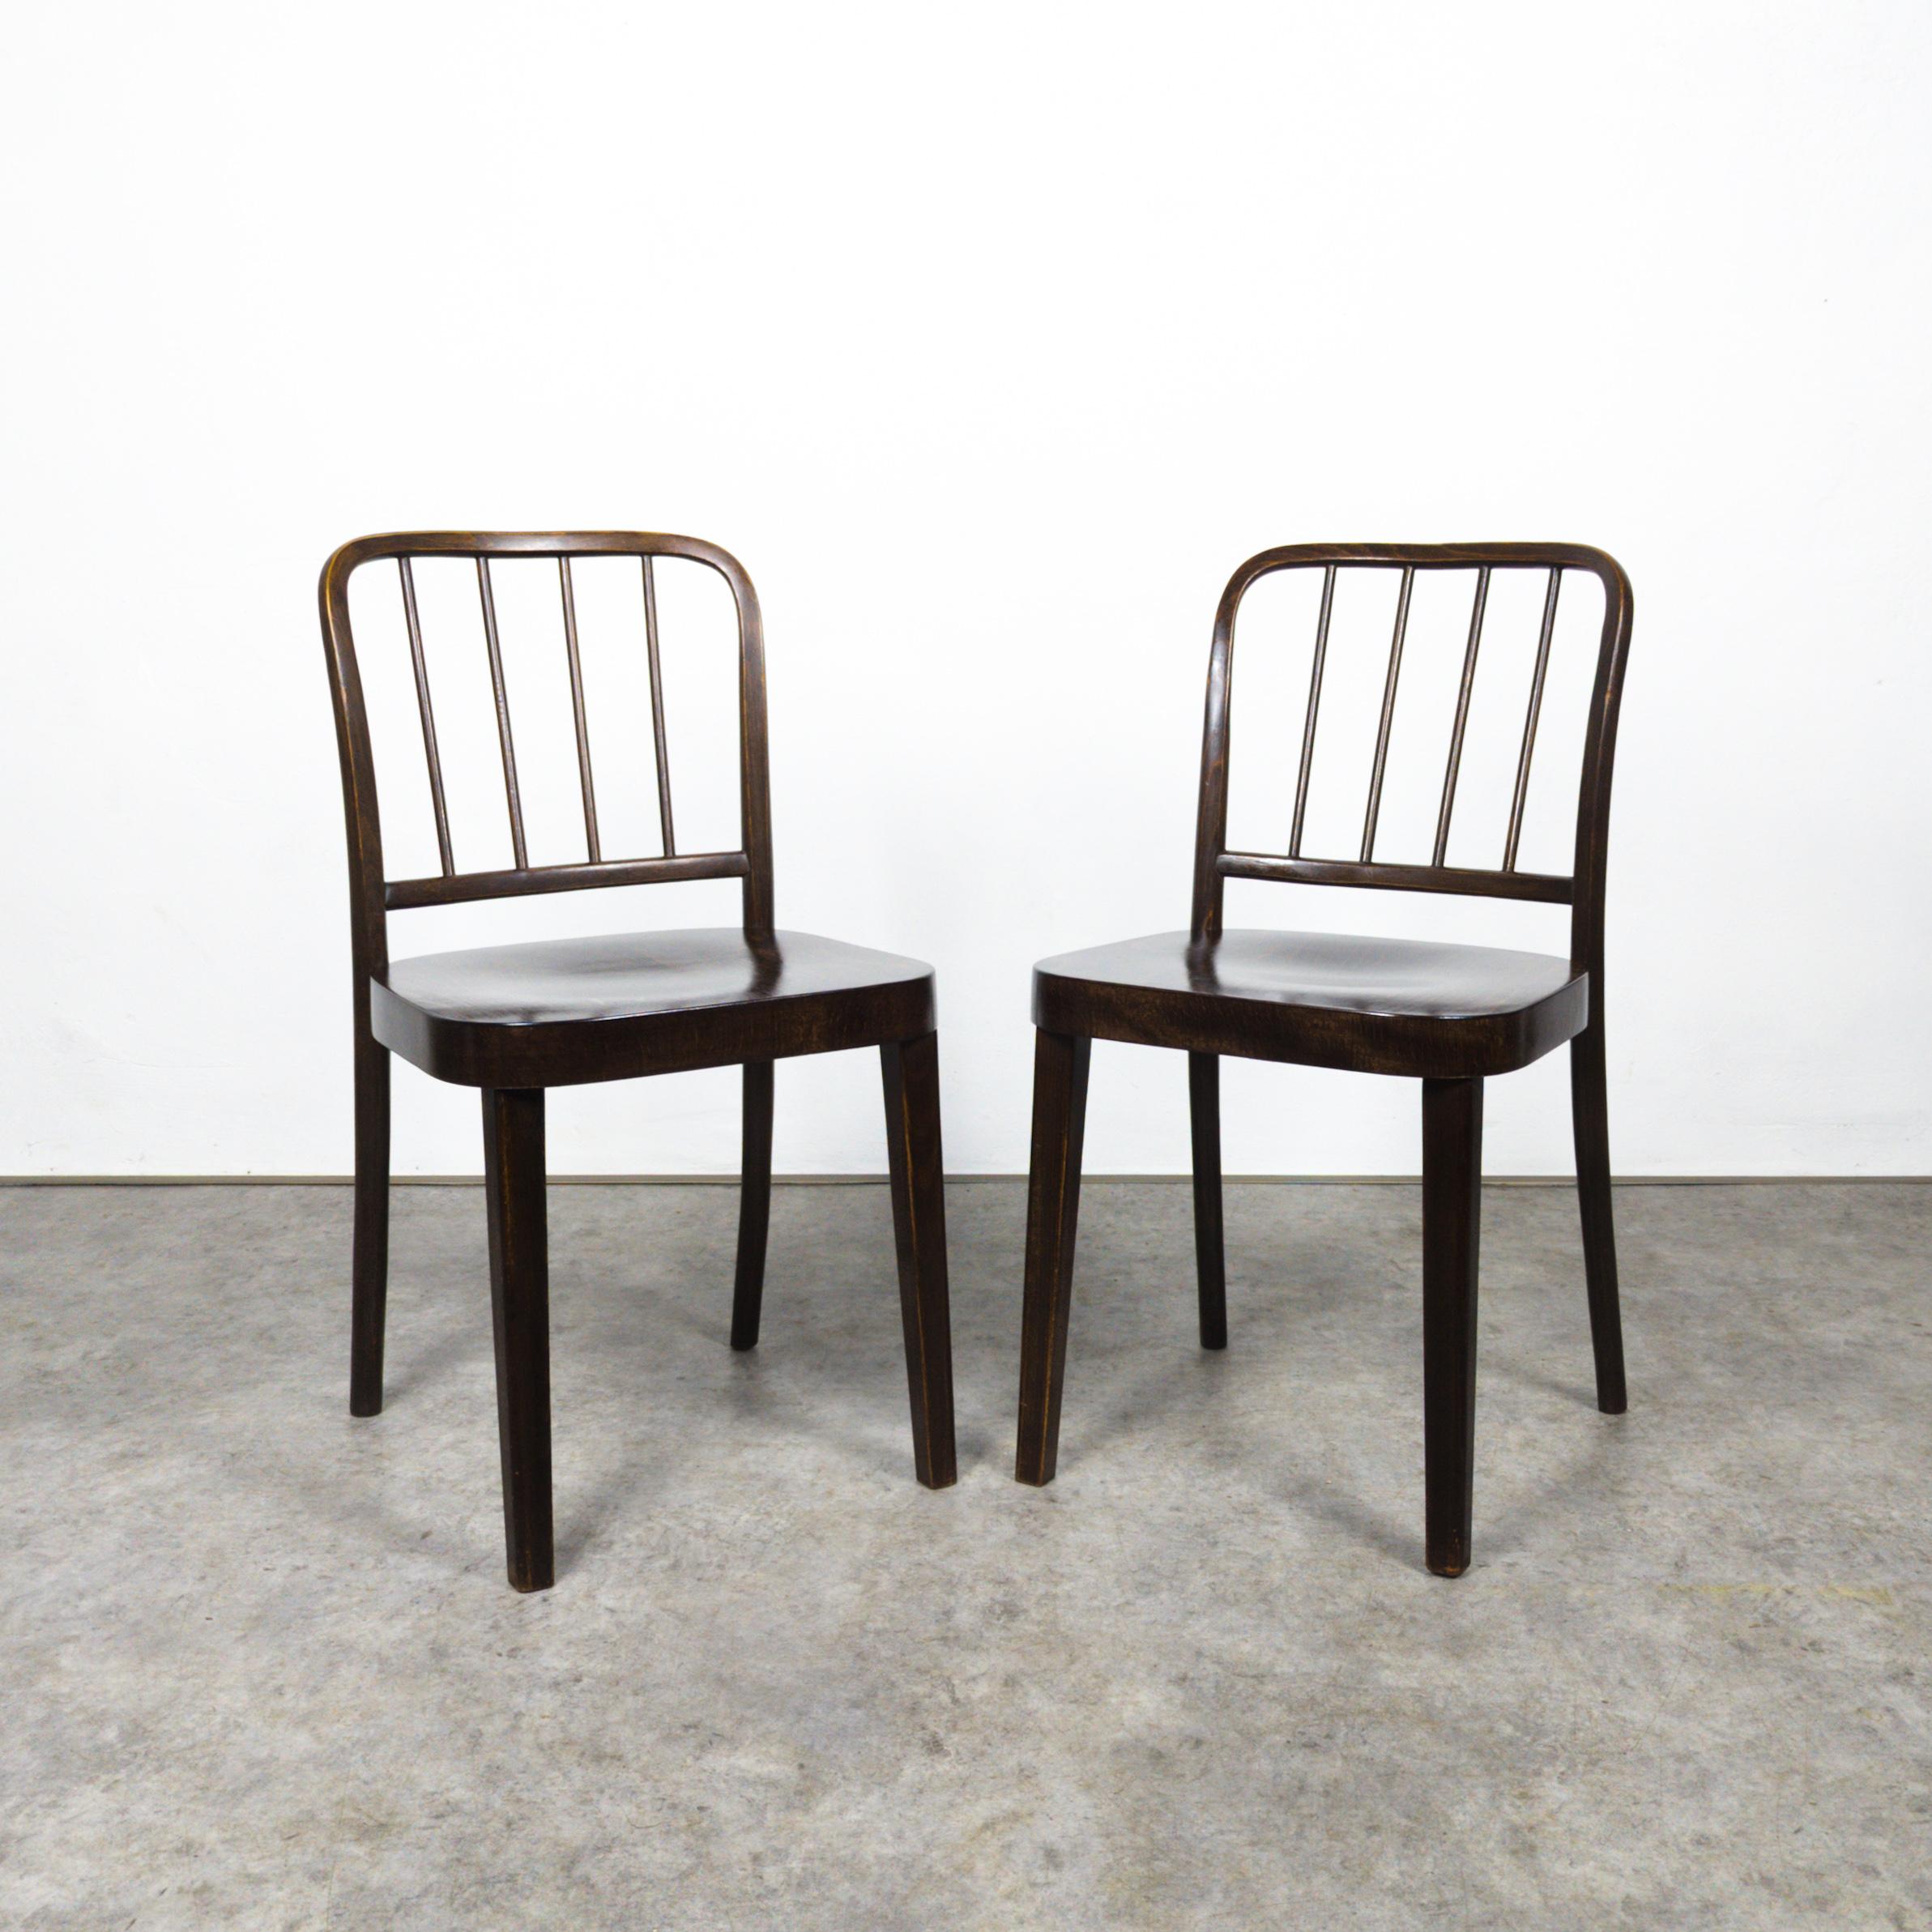 Mid-20th Century Rare set of four Thonet A 811/4 chairs by Josef Hoffmann For Sale